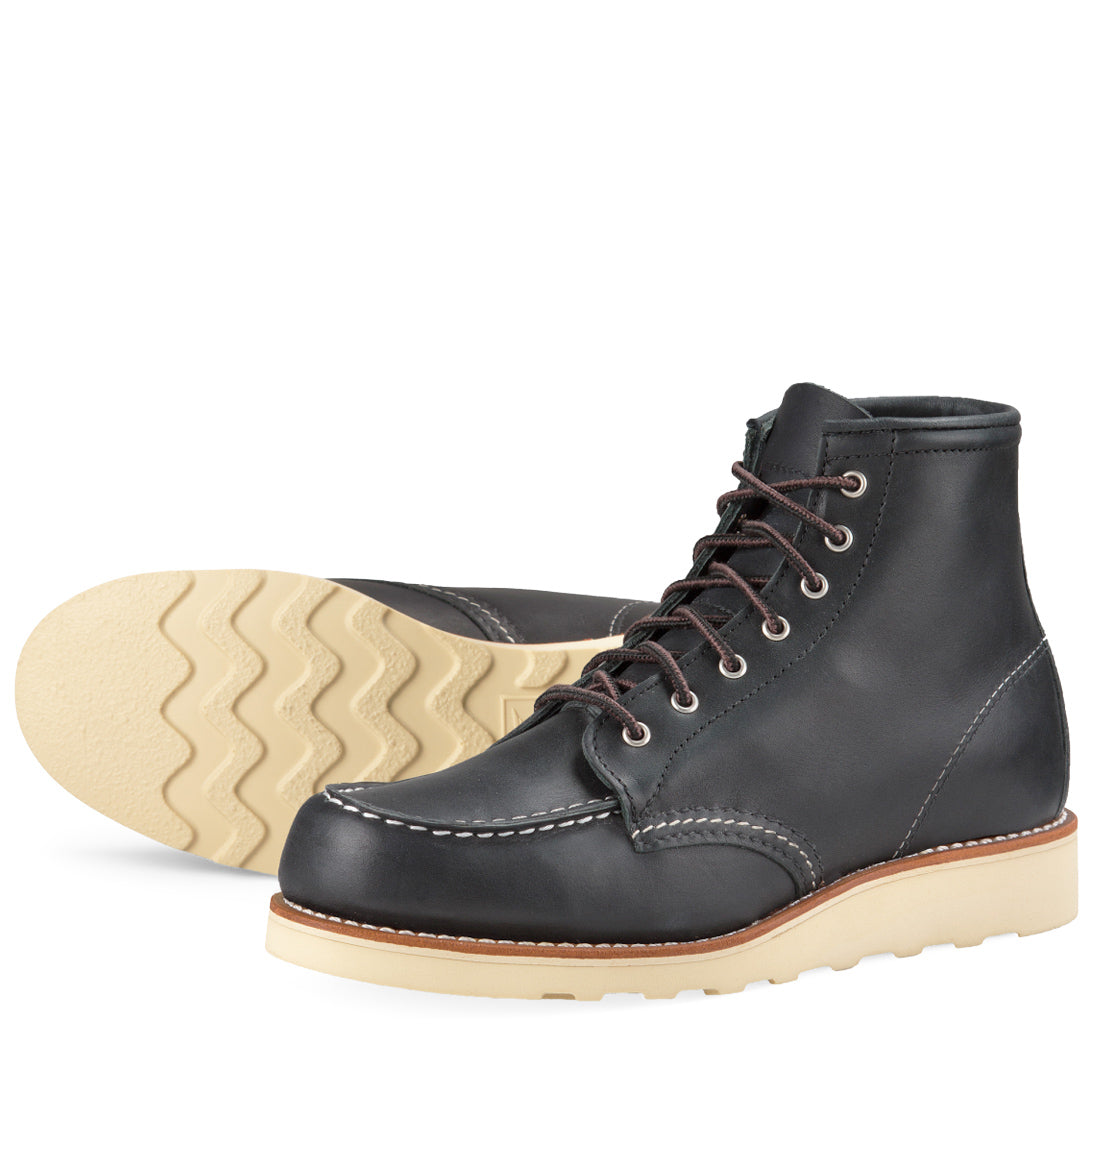 Women's red wing boots 3373